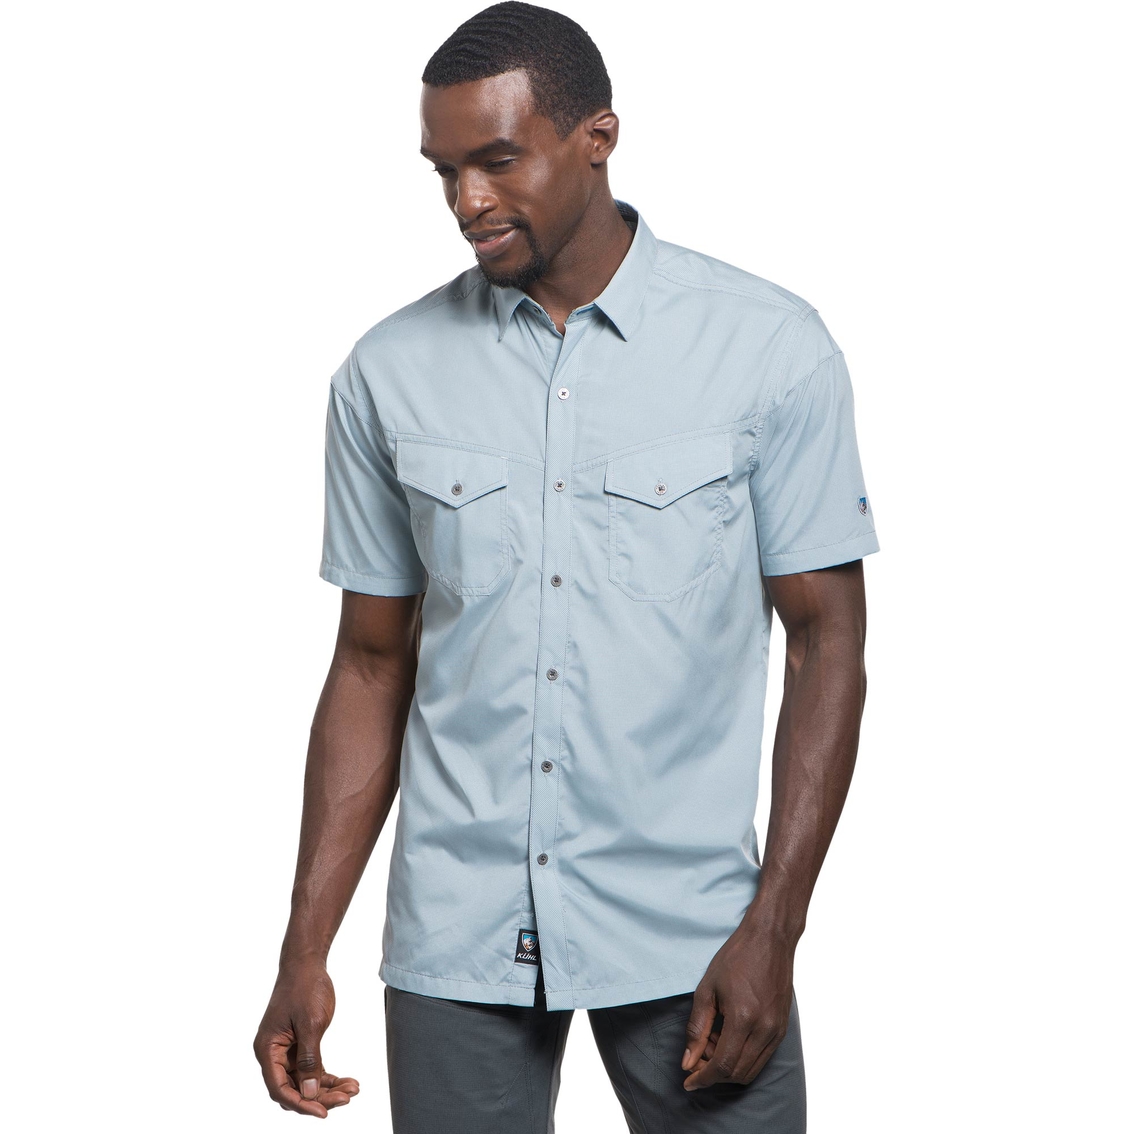 Kuhl Stealth Woven Shirt | Shirts | Clothing & Accessories | Shop The ...